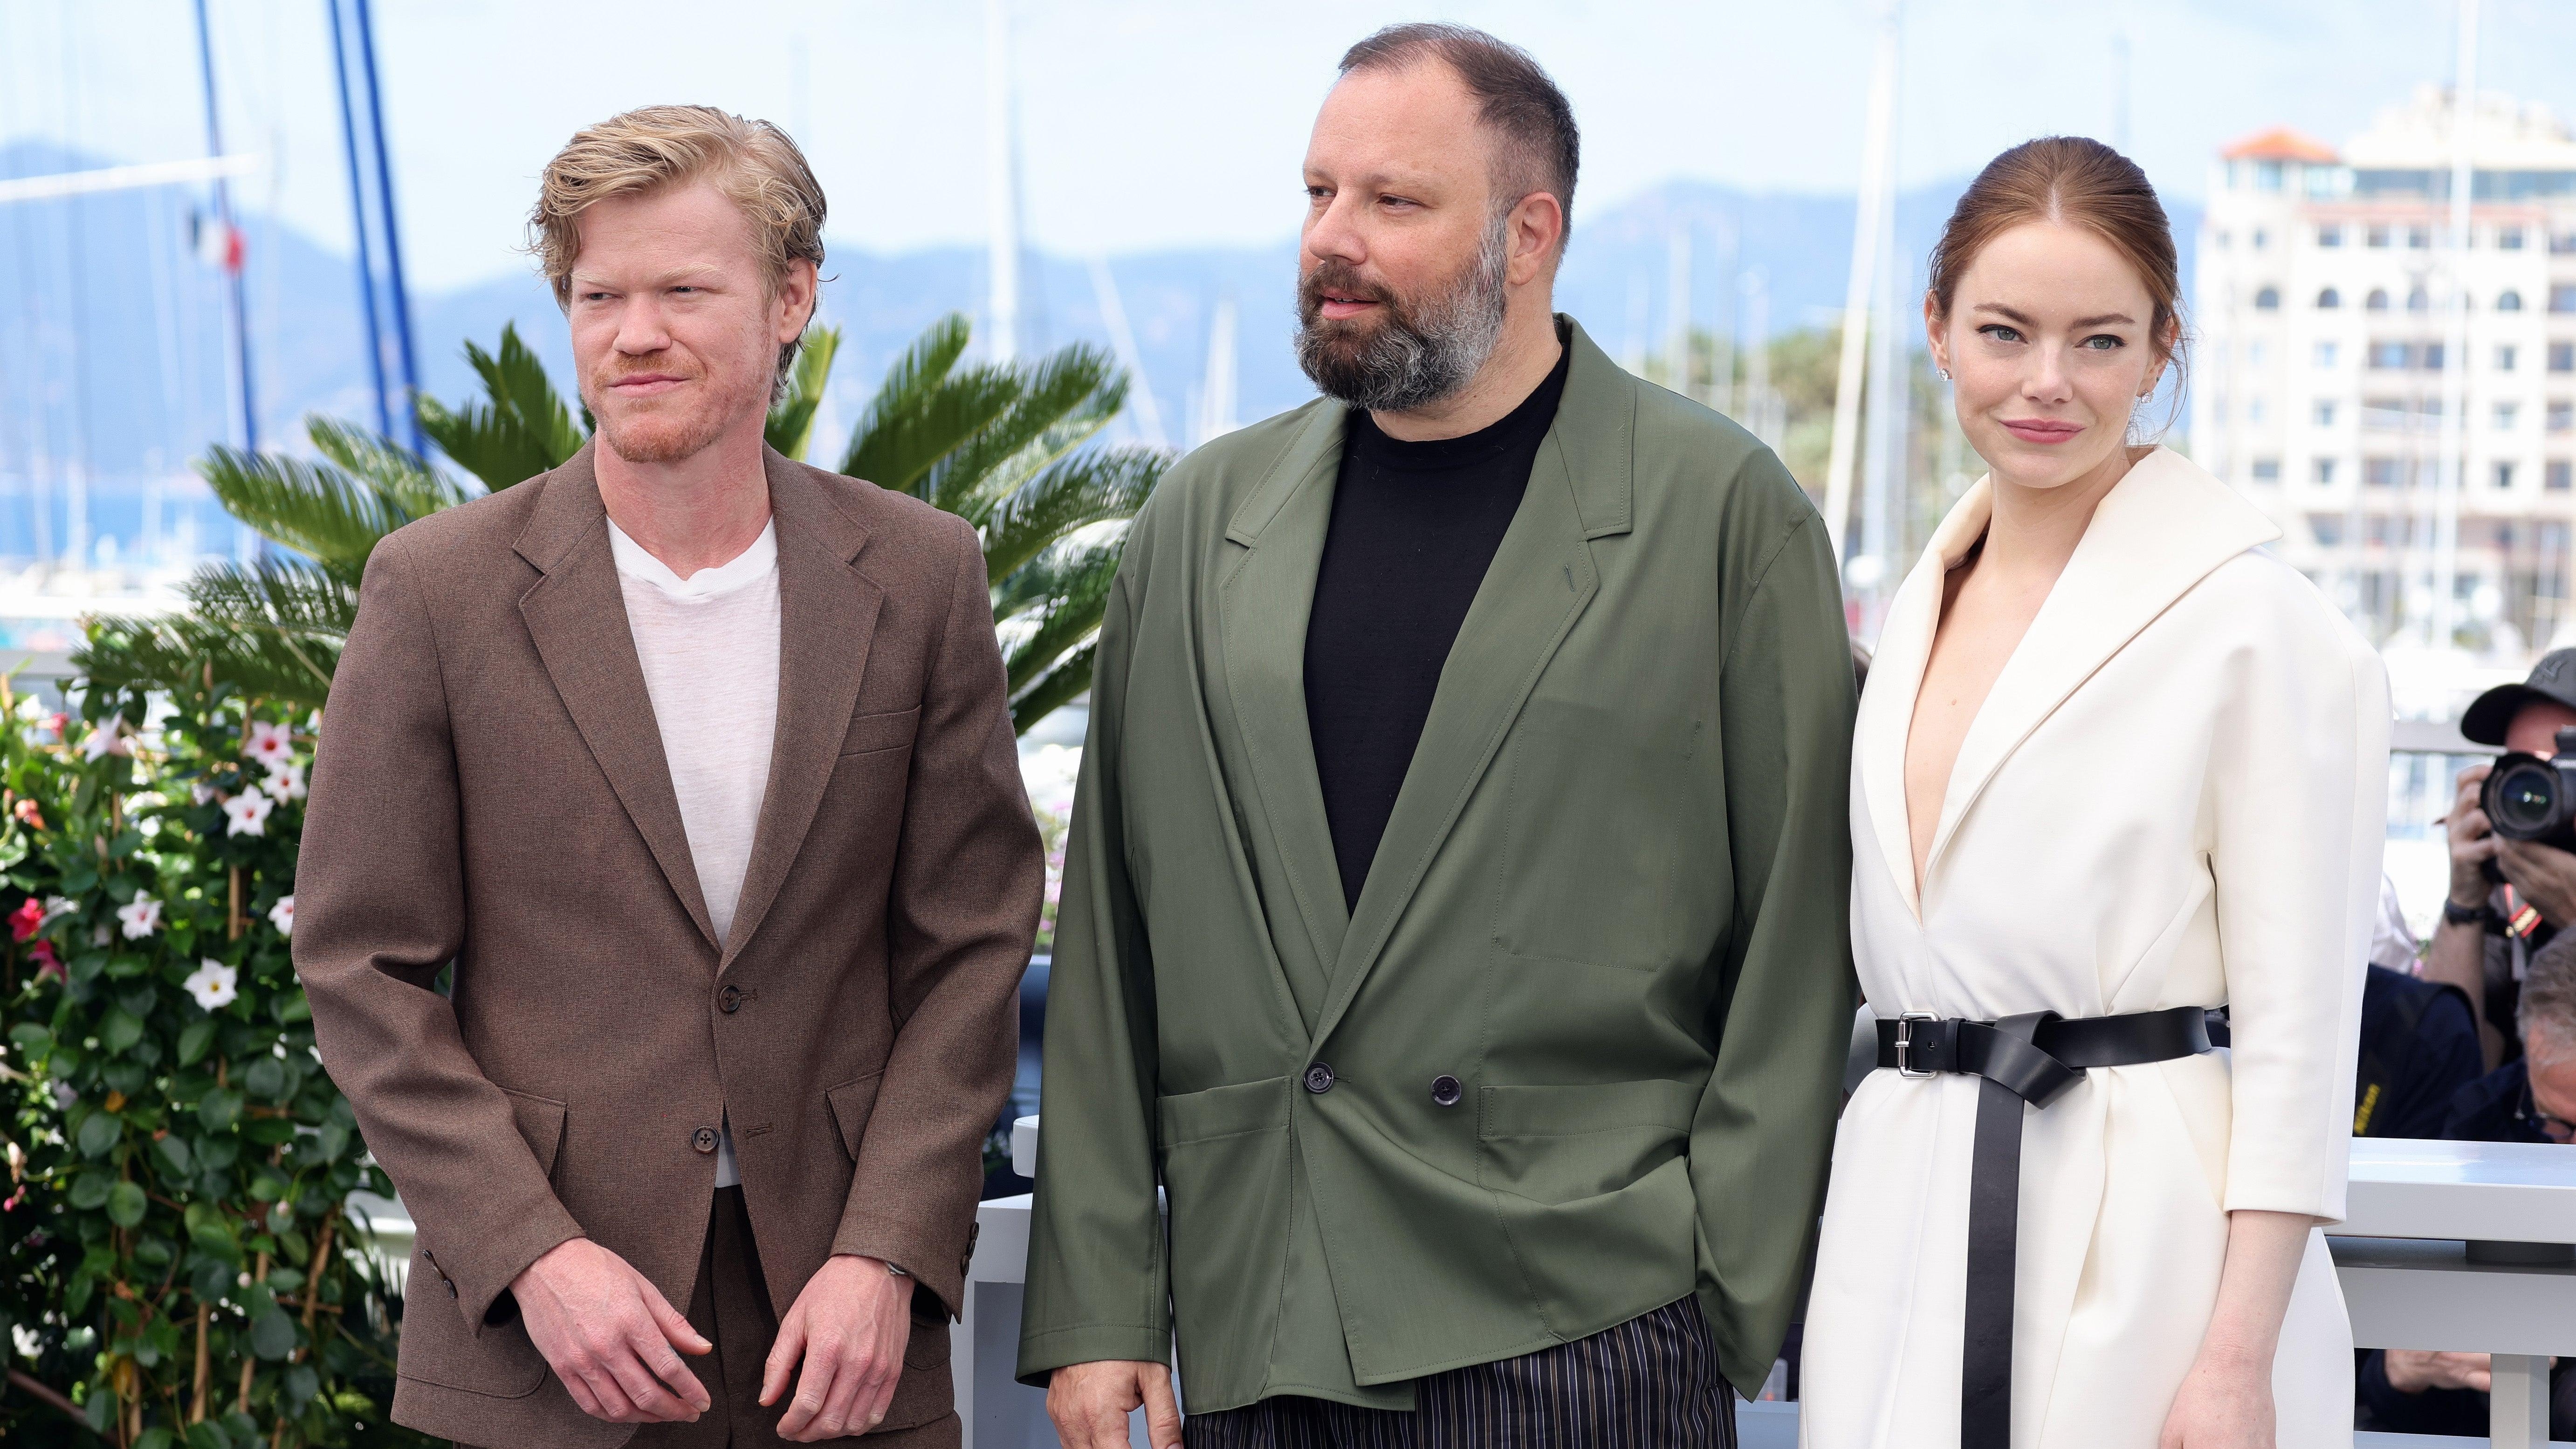 The next joint from Yorgos Lanthimos, Emma Stone, and Jesse Plemmons has a release date